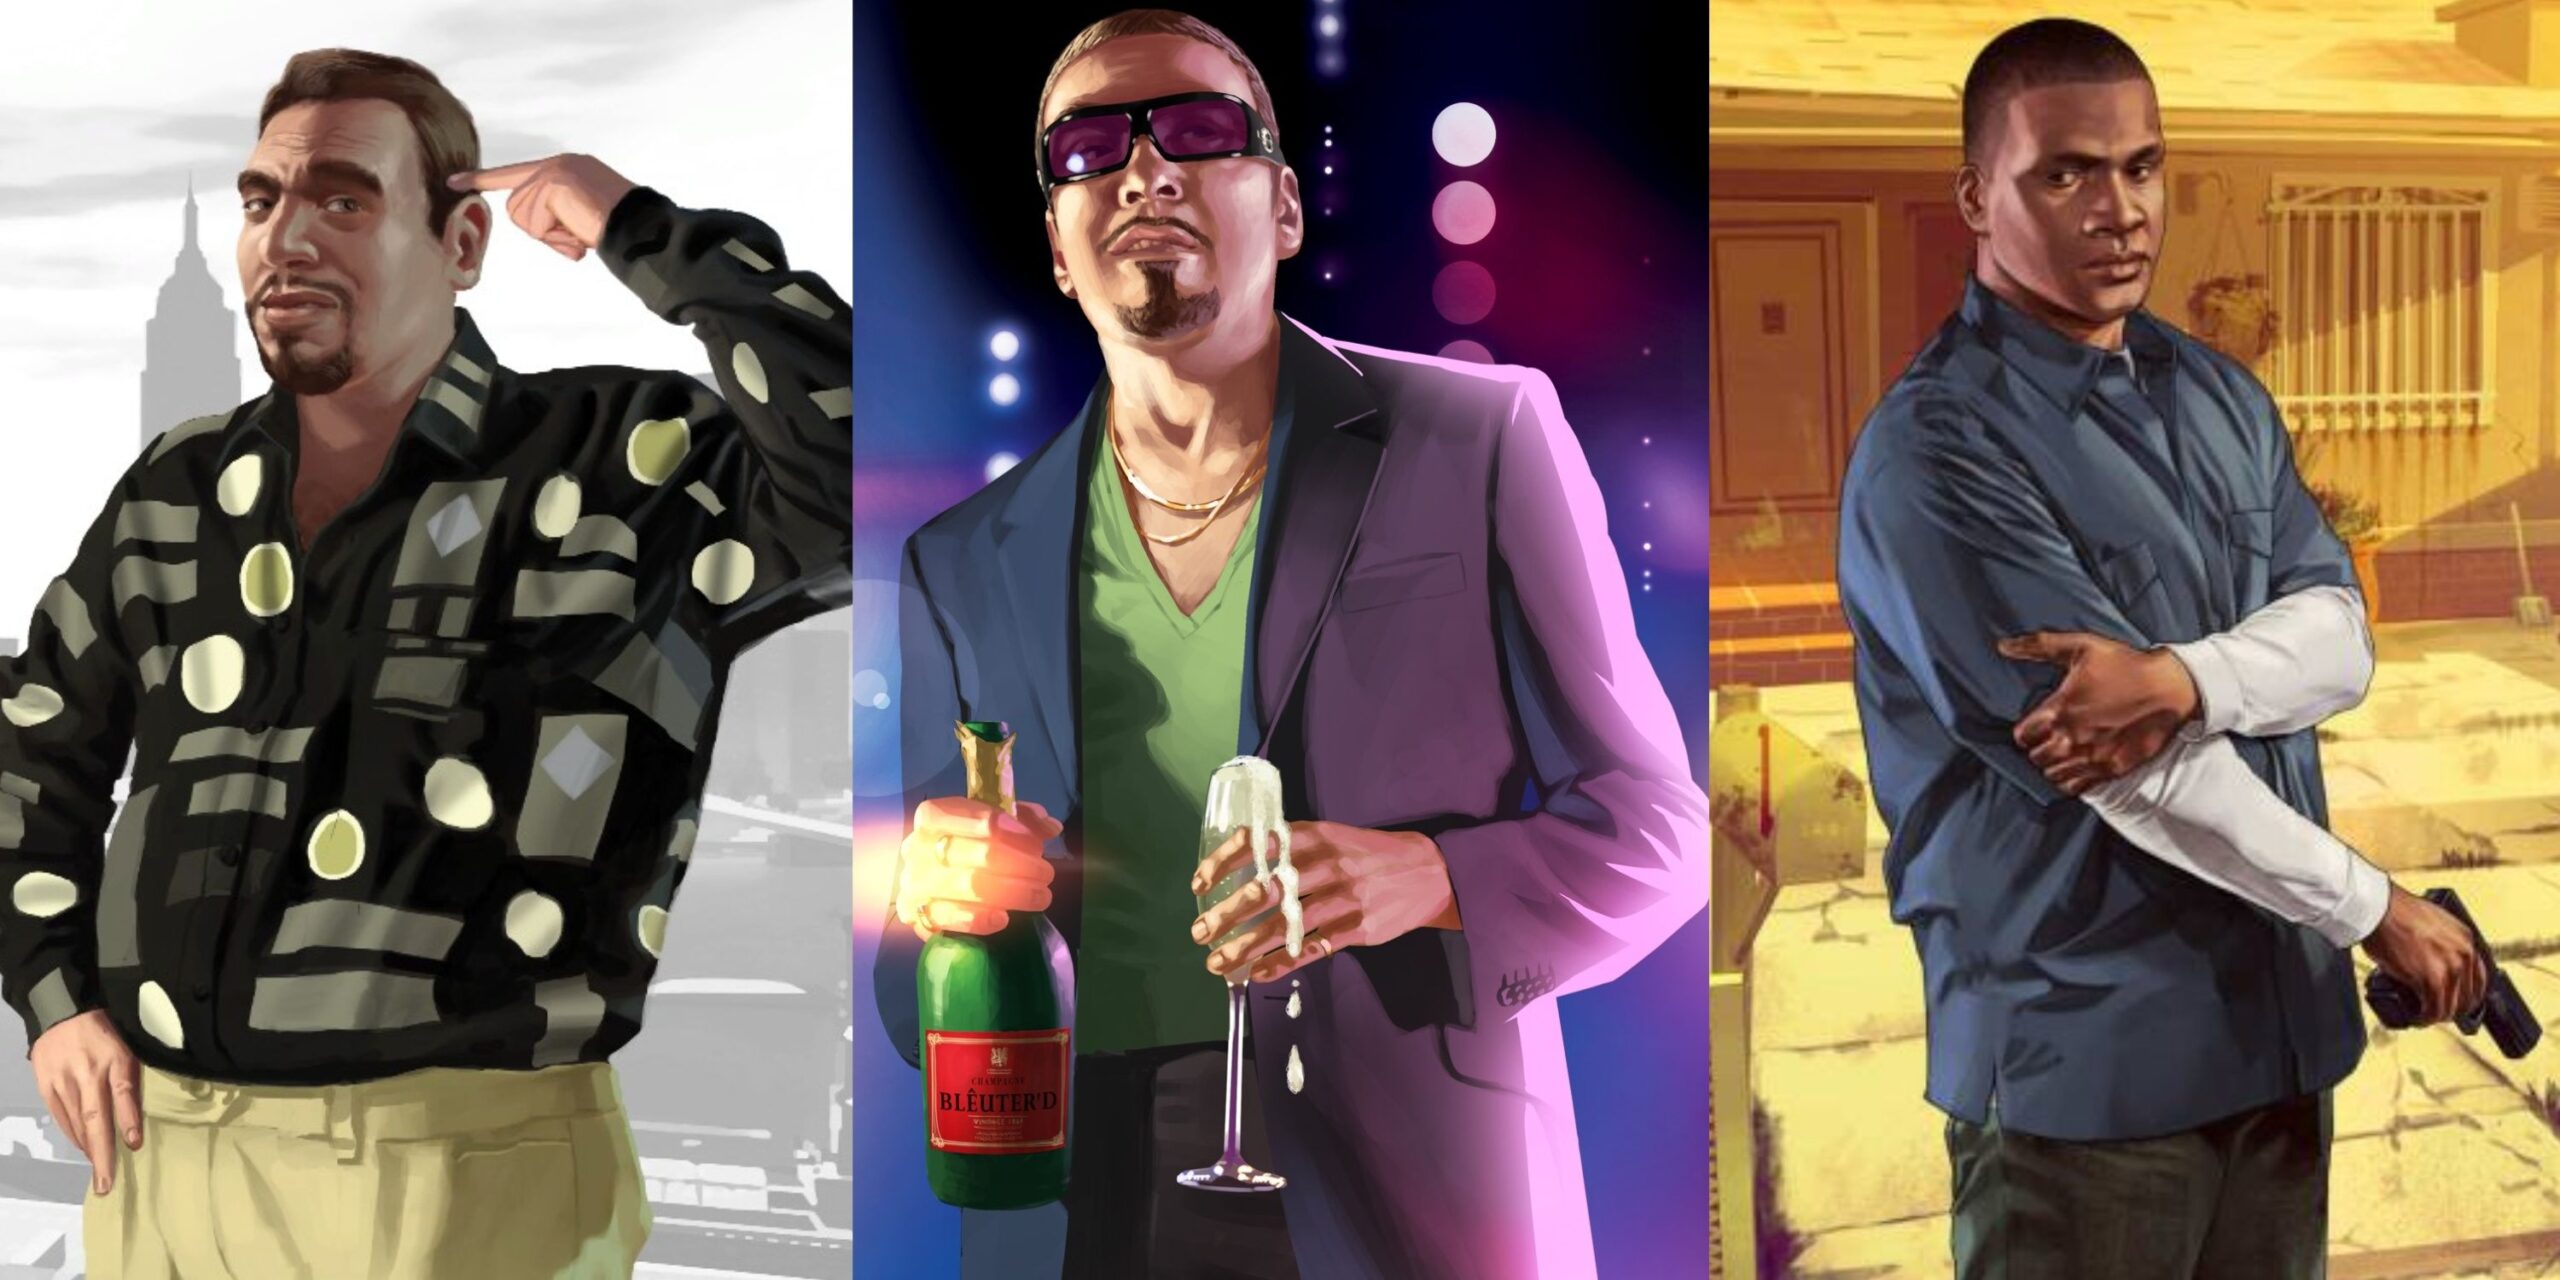 A split image of Roman Bellic, Tony Prince, and Franklin Clinton from the Grand Theft Auto franchise